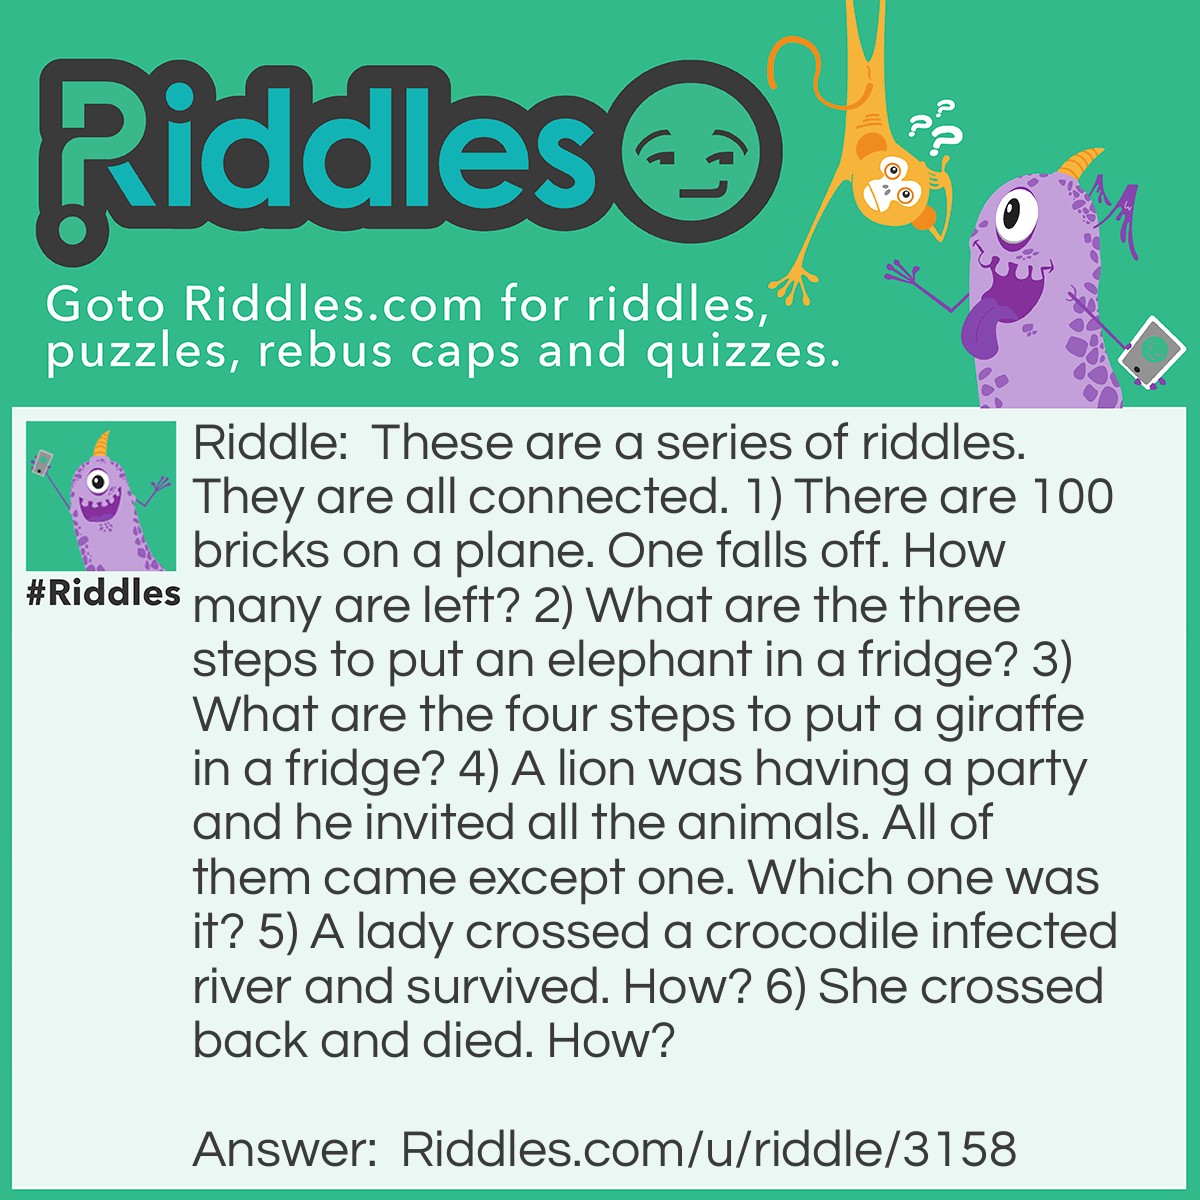 Riddle: These are a series of <a href="/">riddles</a>. They are all connected. 1) There are 100 bricks on a plane. One falls off. How many are left? 2) What are the three steps to put an elephant in a fridge? 3) What are the four steps to put a giraffe in a fridge? 4) A lion was having a party and he invited all the animals. All of them came except one. Which one was it? 5) A lady crossed a crocodile-infested river and survived. How? 6) She crossed back and died. How? Answer: 1) 99 2) Open the door, put the elephant in, and close the door. 3) Open the door, take the elephant out, put the giraffe in, and close the door. 4) The giraffe. It was in the fridge. 5) The crocodiles were at the party. 6) The brick from the plane hit her in the head.